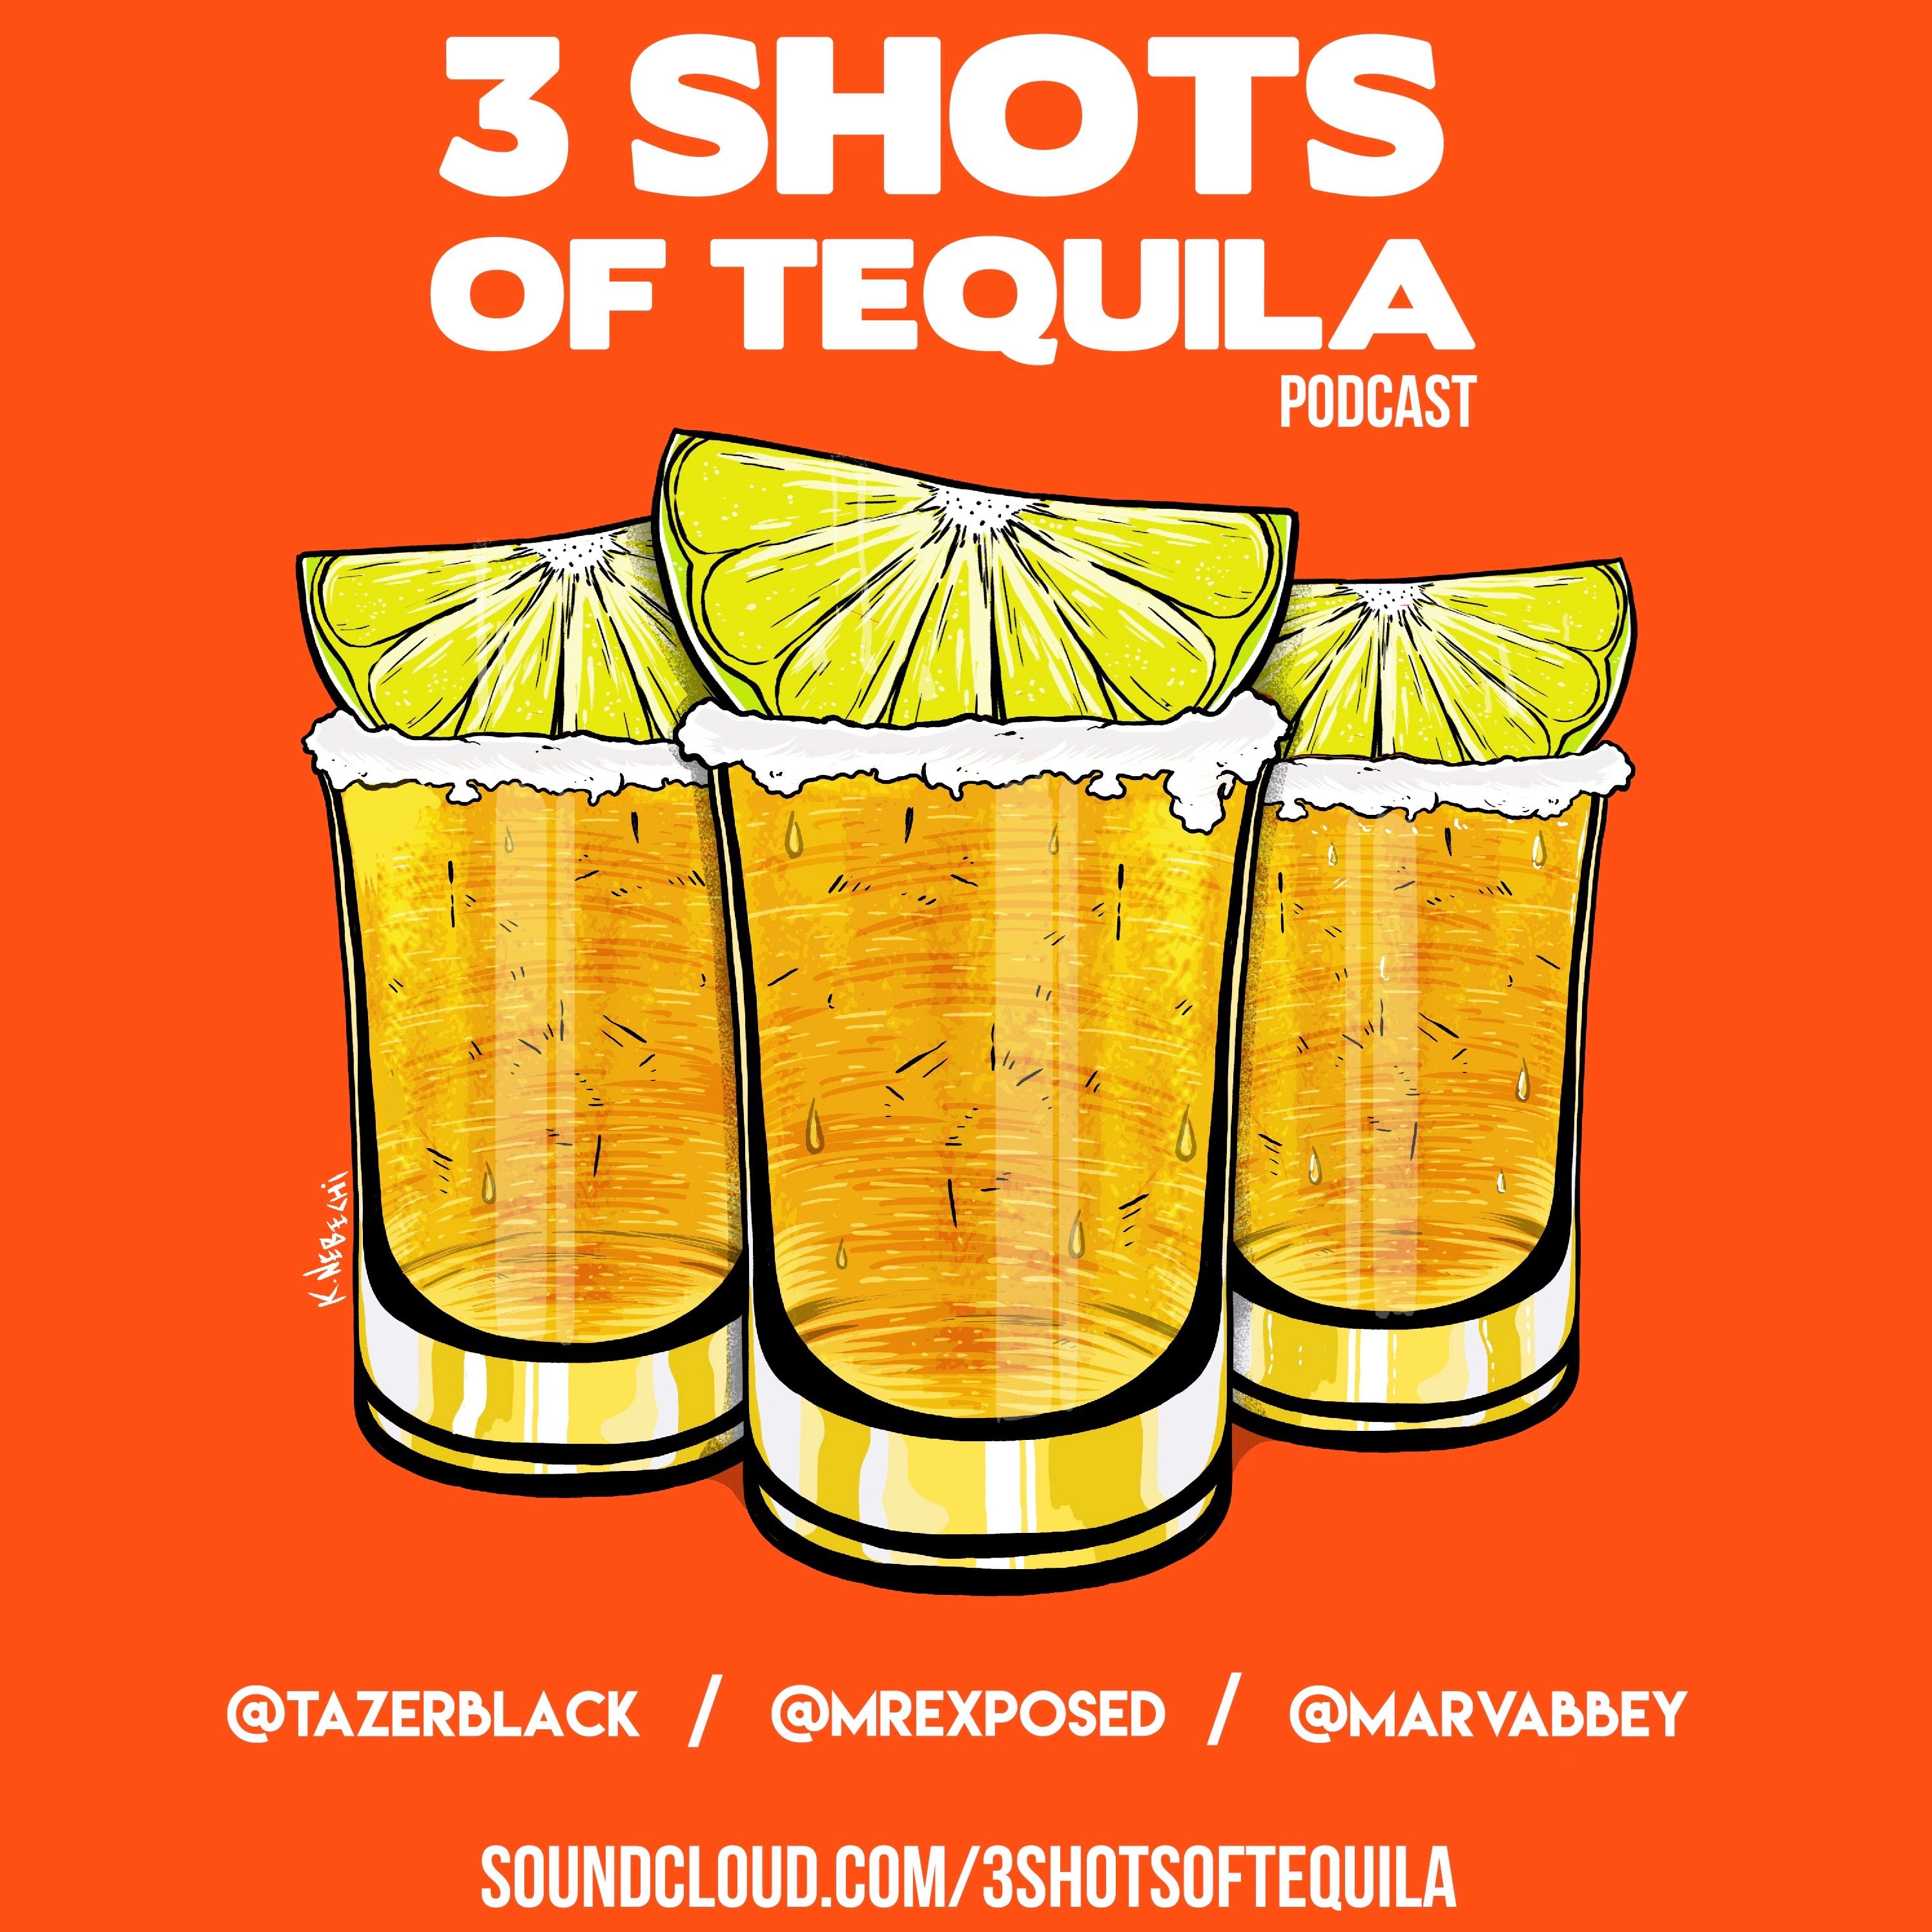 3 Shots of Tequila Podcast